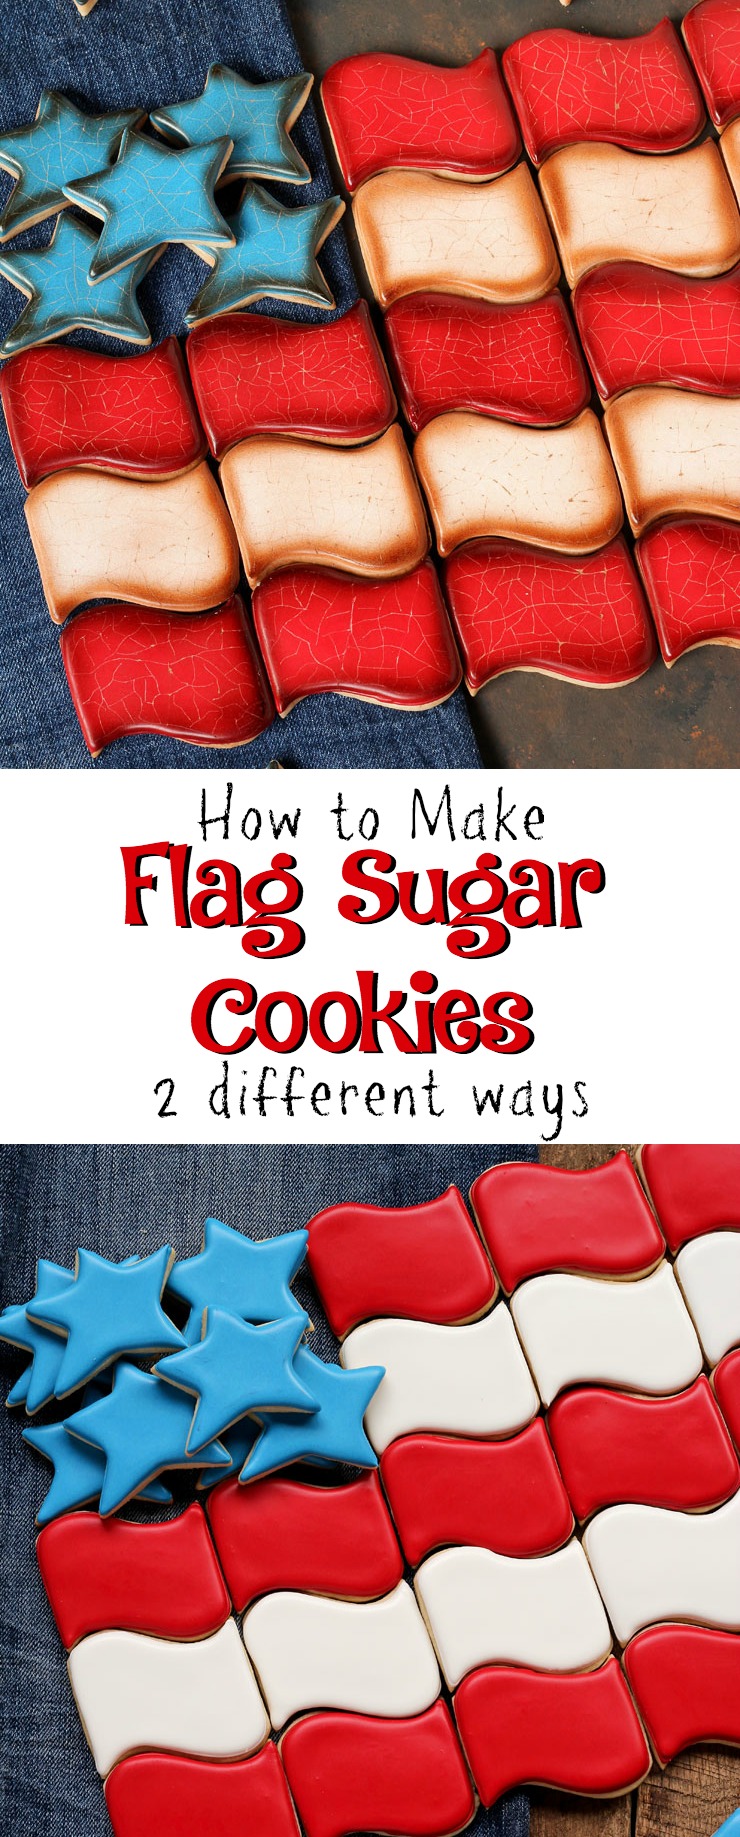 How to Distress Sugar Cookies for an Aged Look or Keep it Simple via www.thebearfootbaker.com